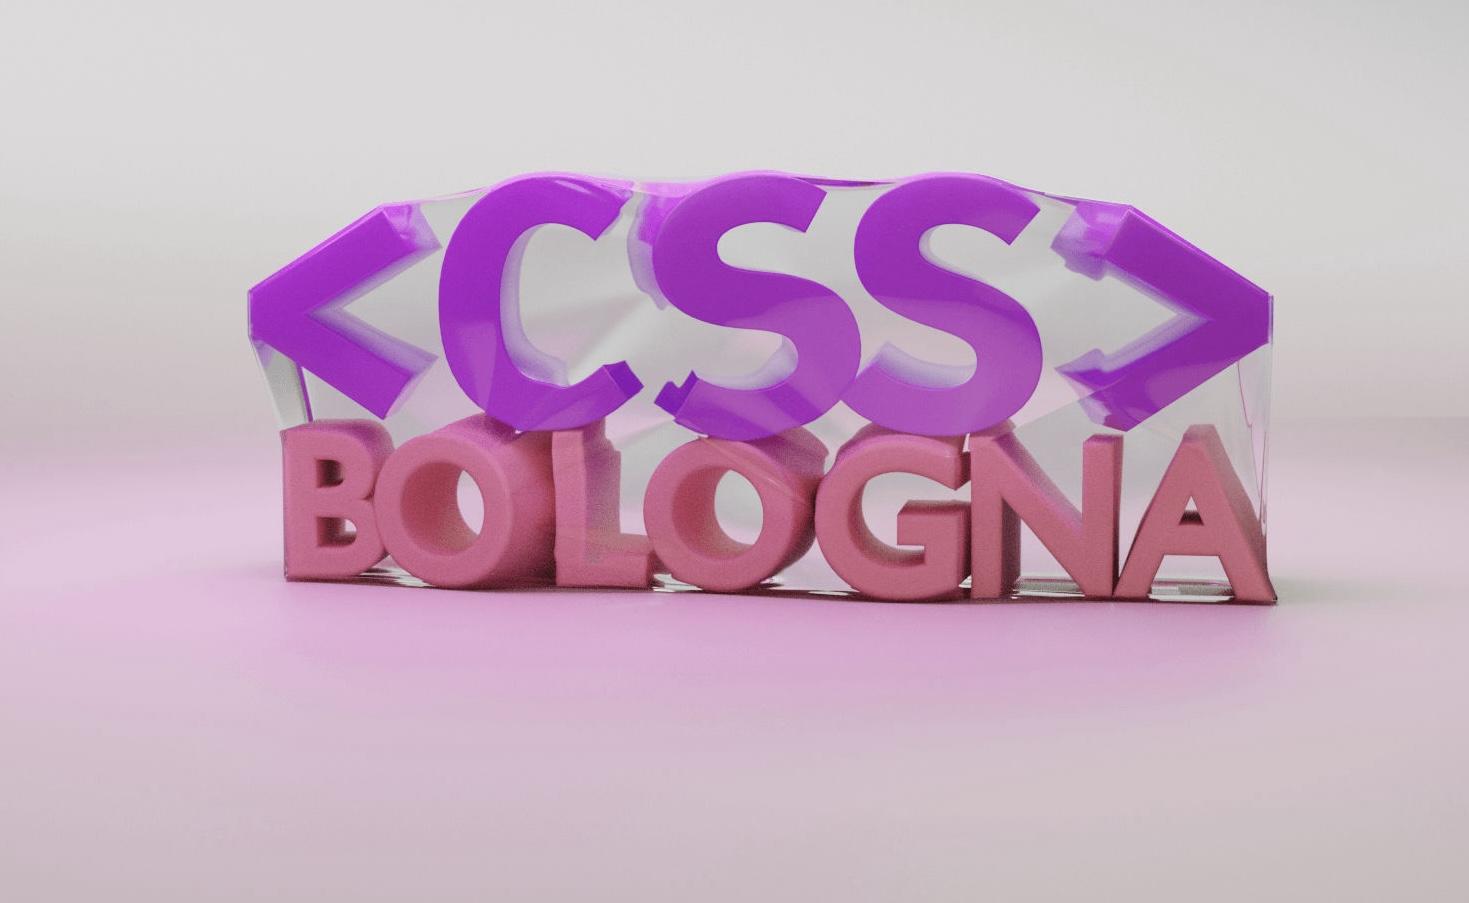 A 3d render with text that says CSS Bologna